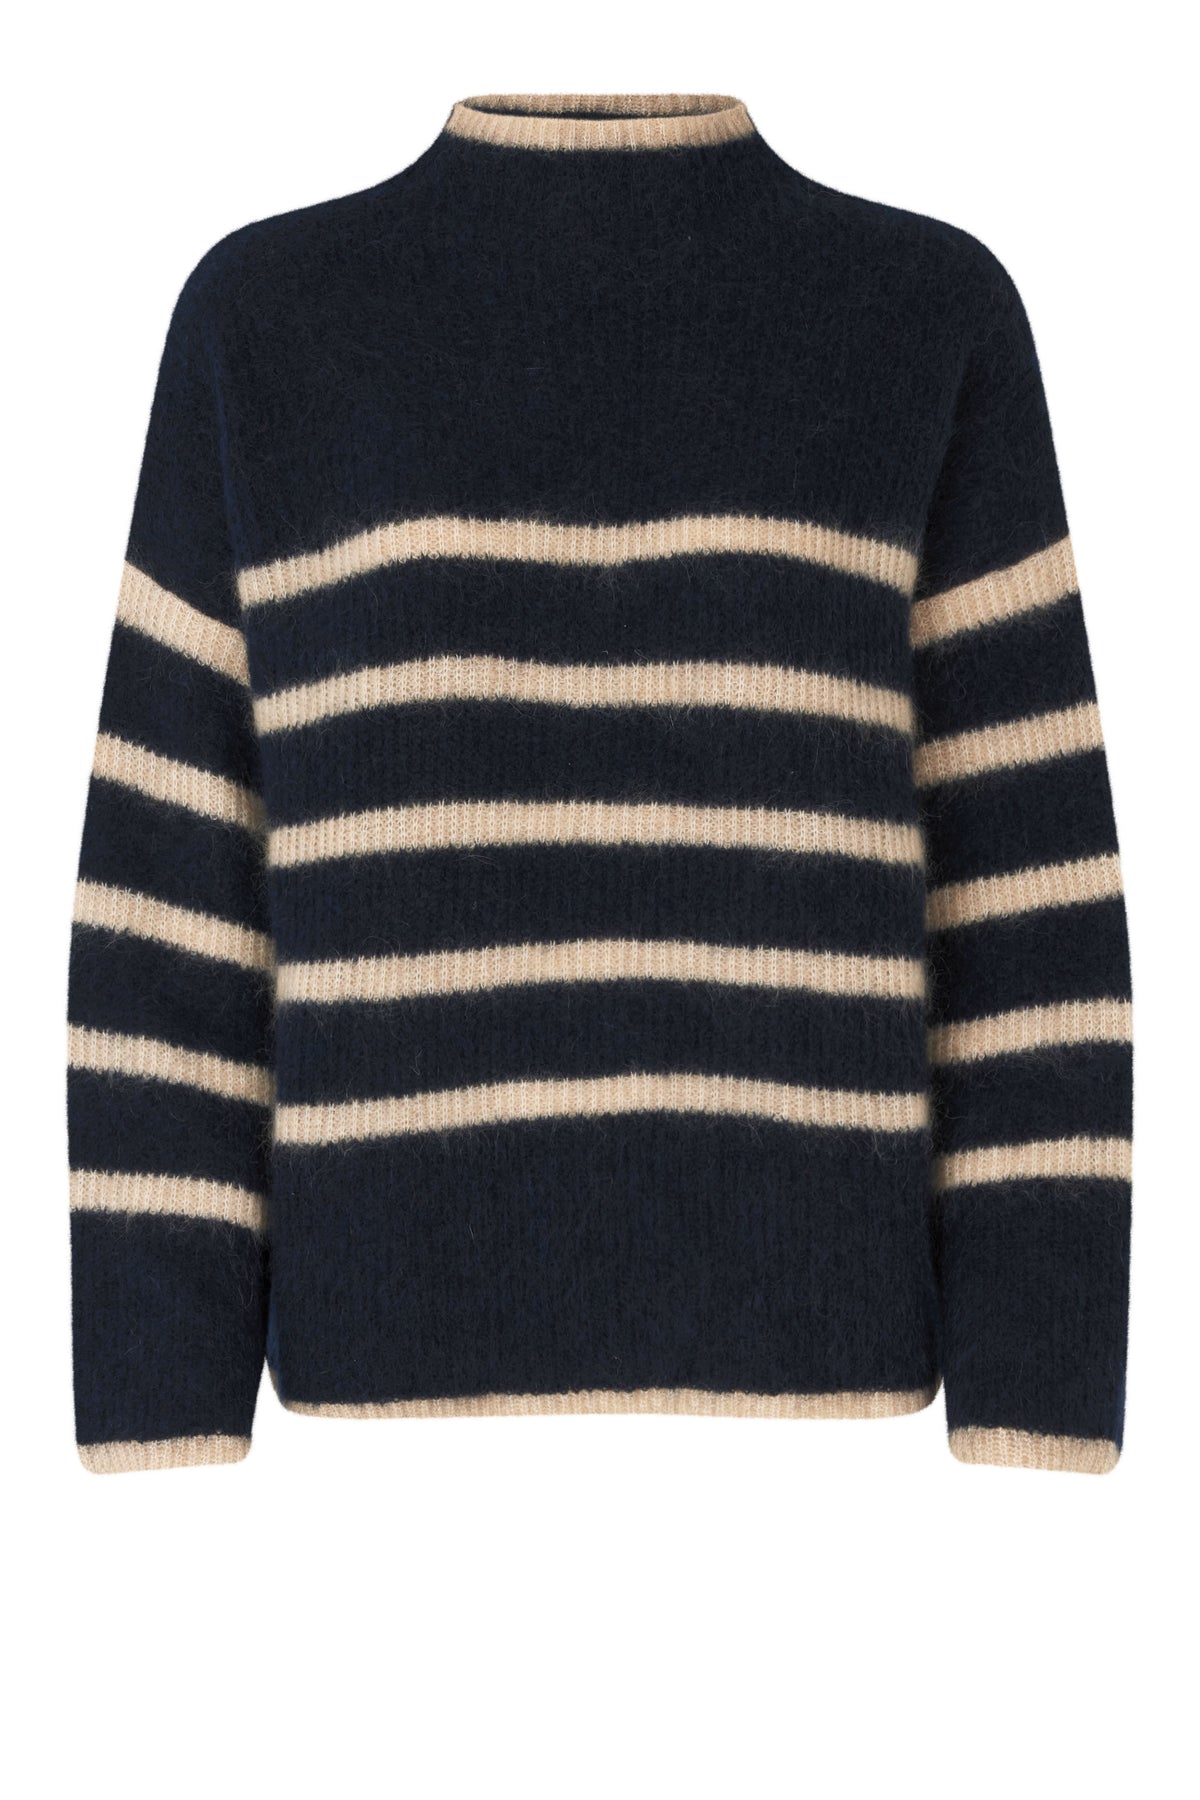 Funnel neck navy and taupe striped jumper